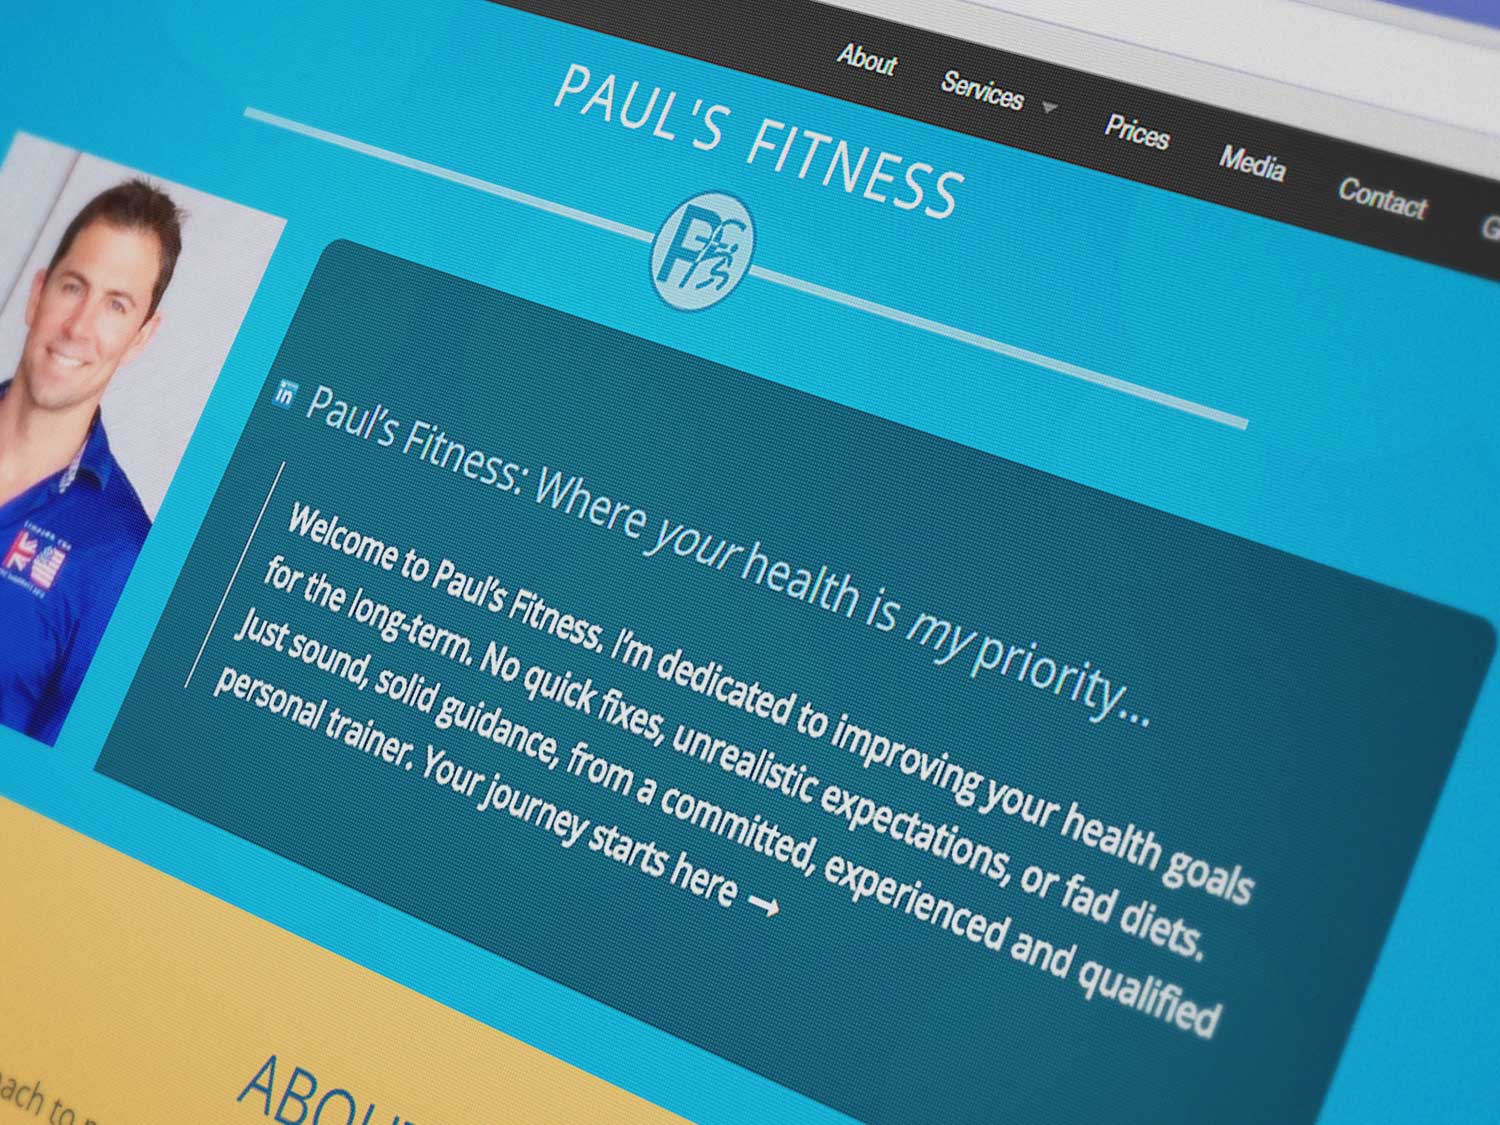 Paul's Fitness personal trainer website featuring Skype Fitness